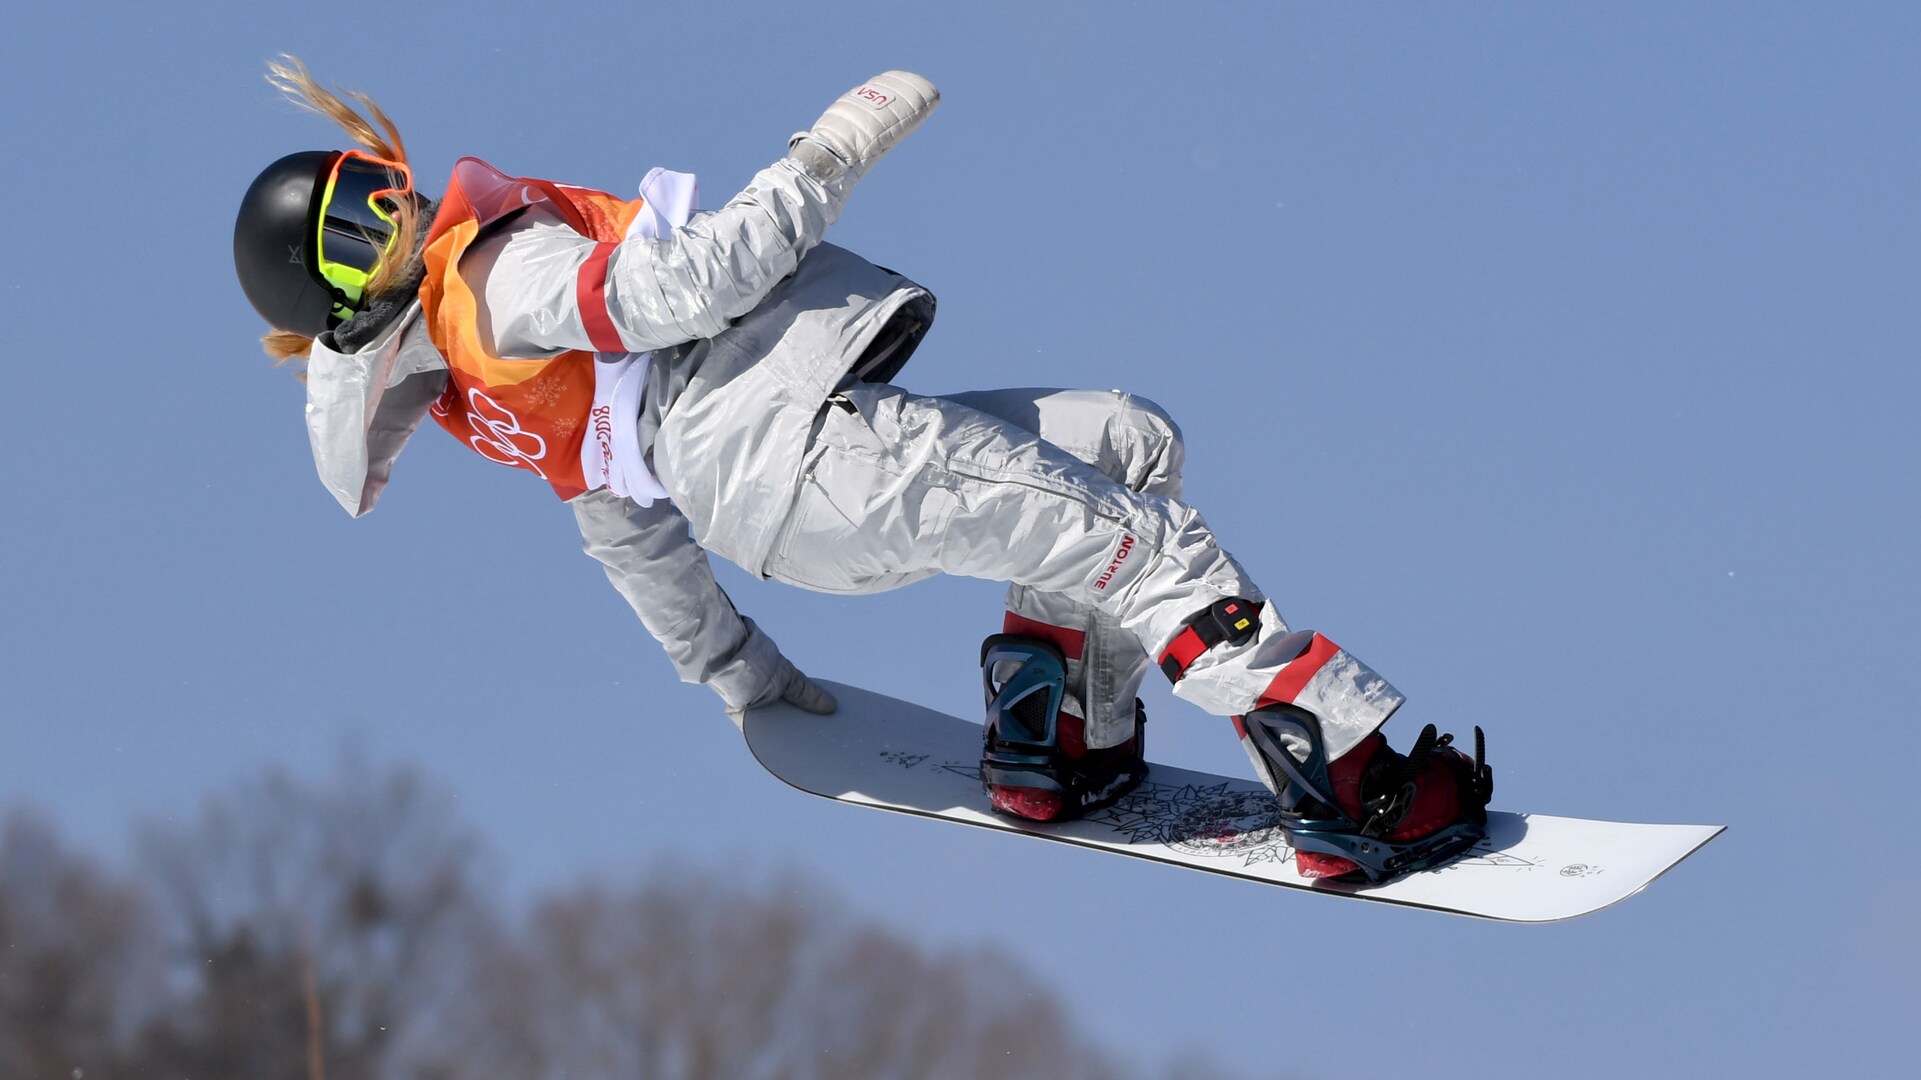 Chloe Kim 2022 Olympics When Does She Compete?